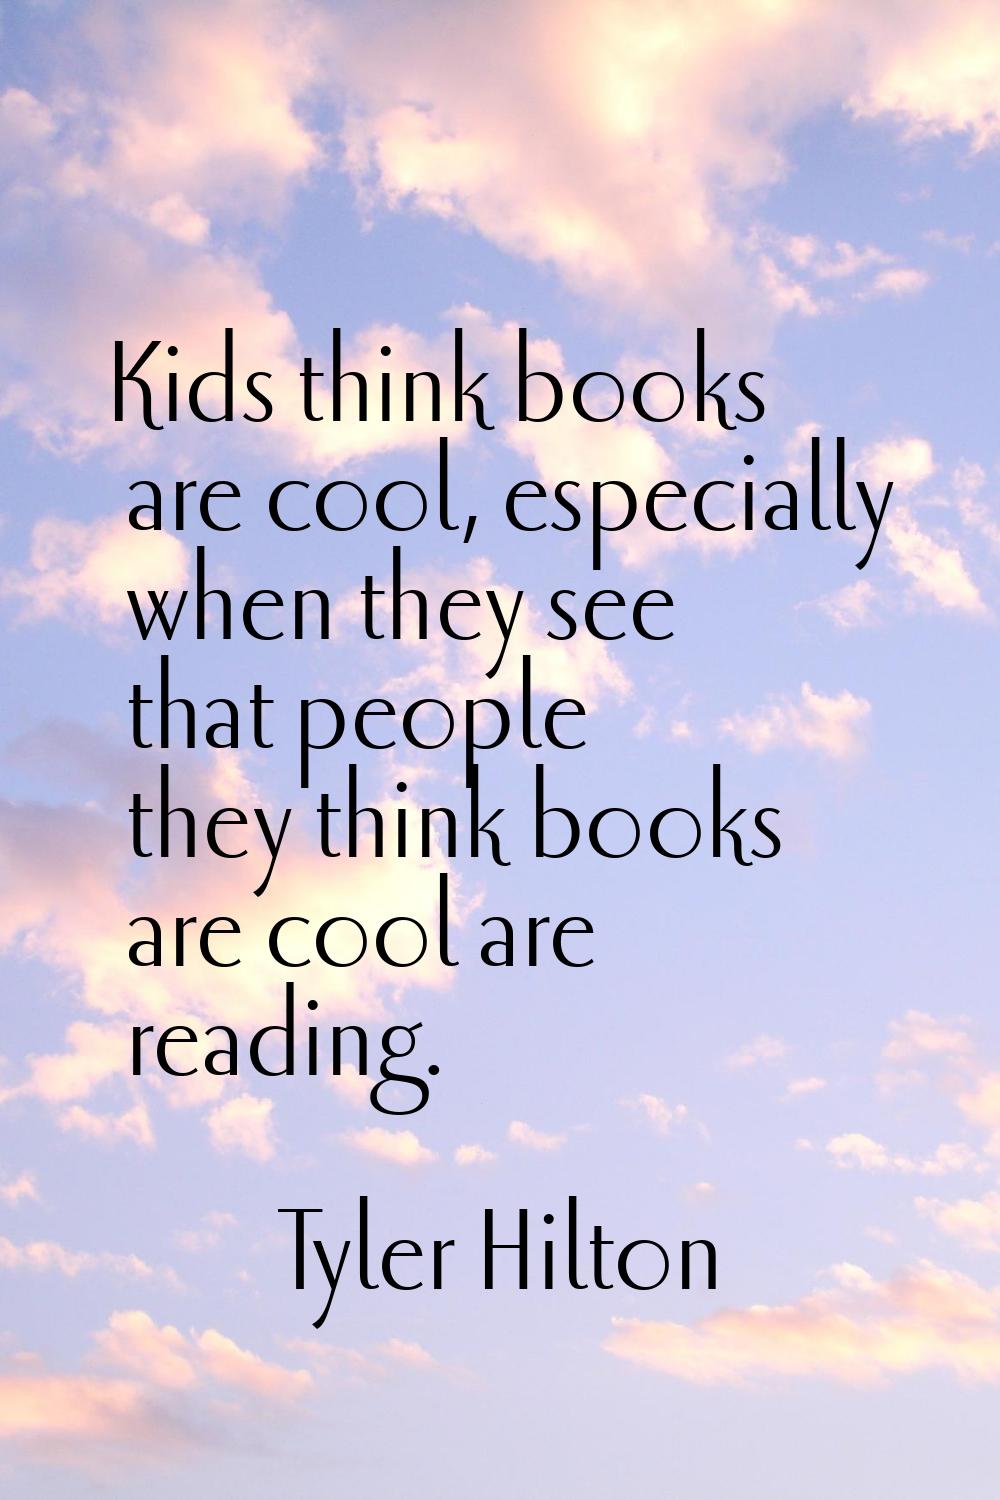 Kids think books are cool, especially when they see that people they think books are cool are readi